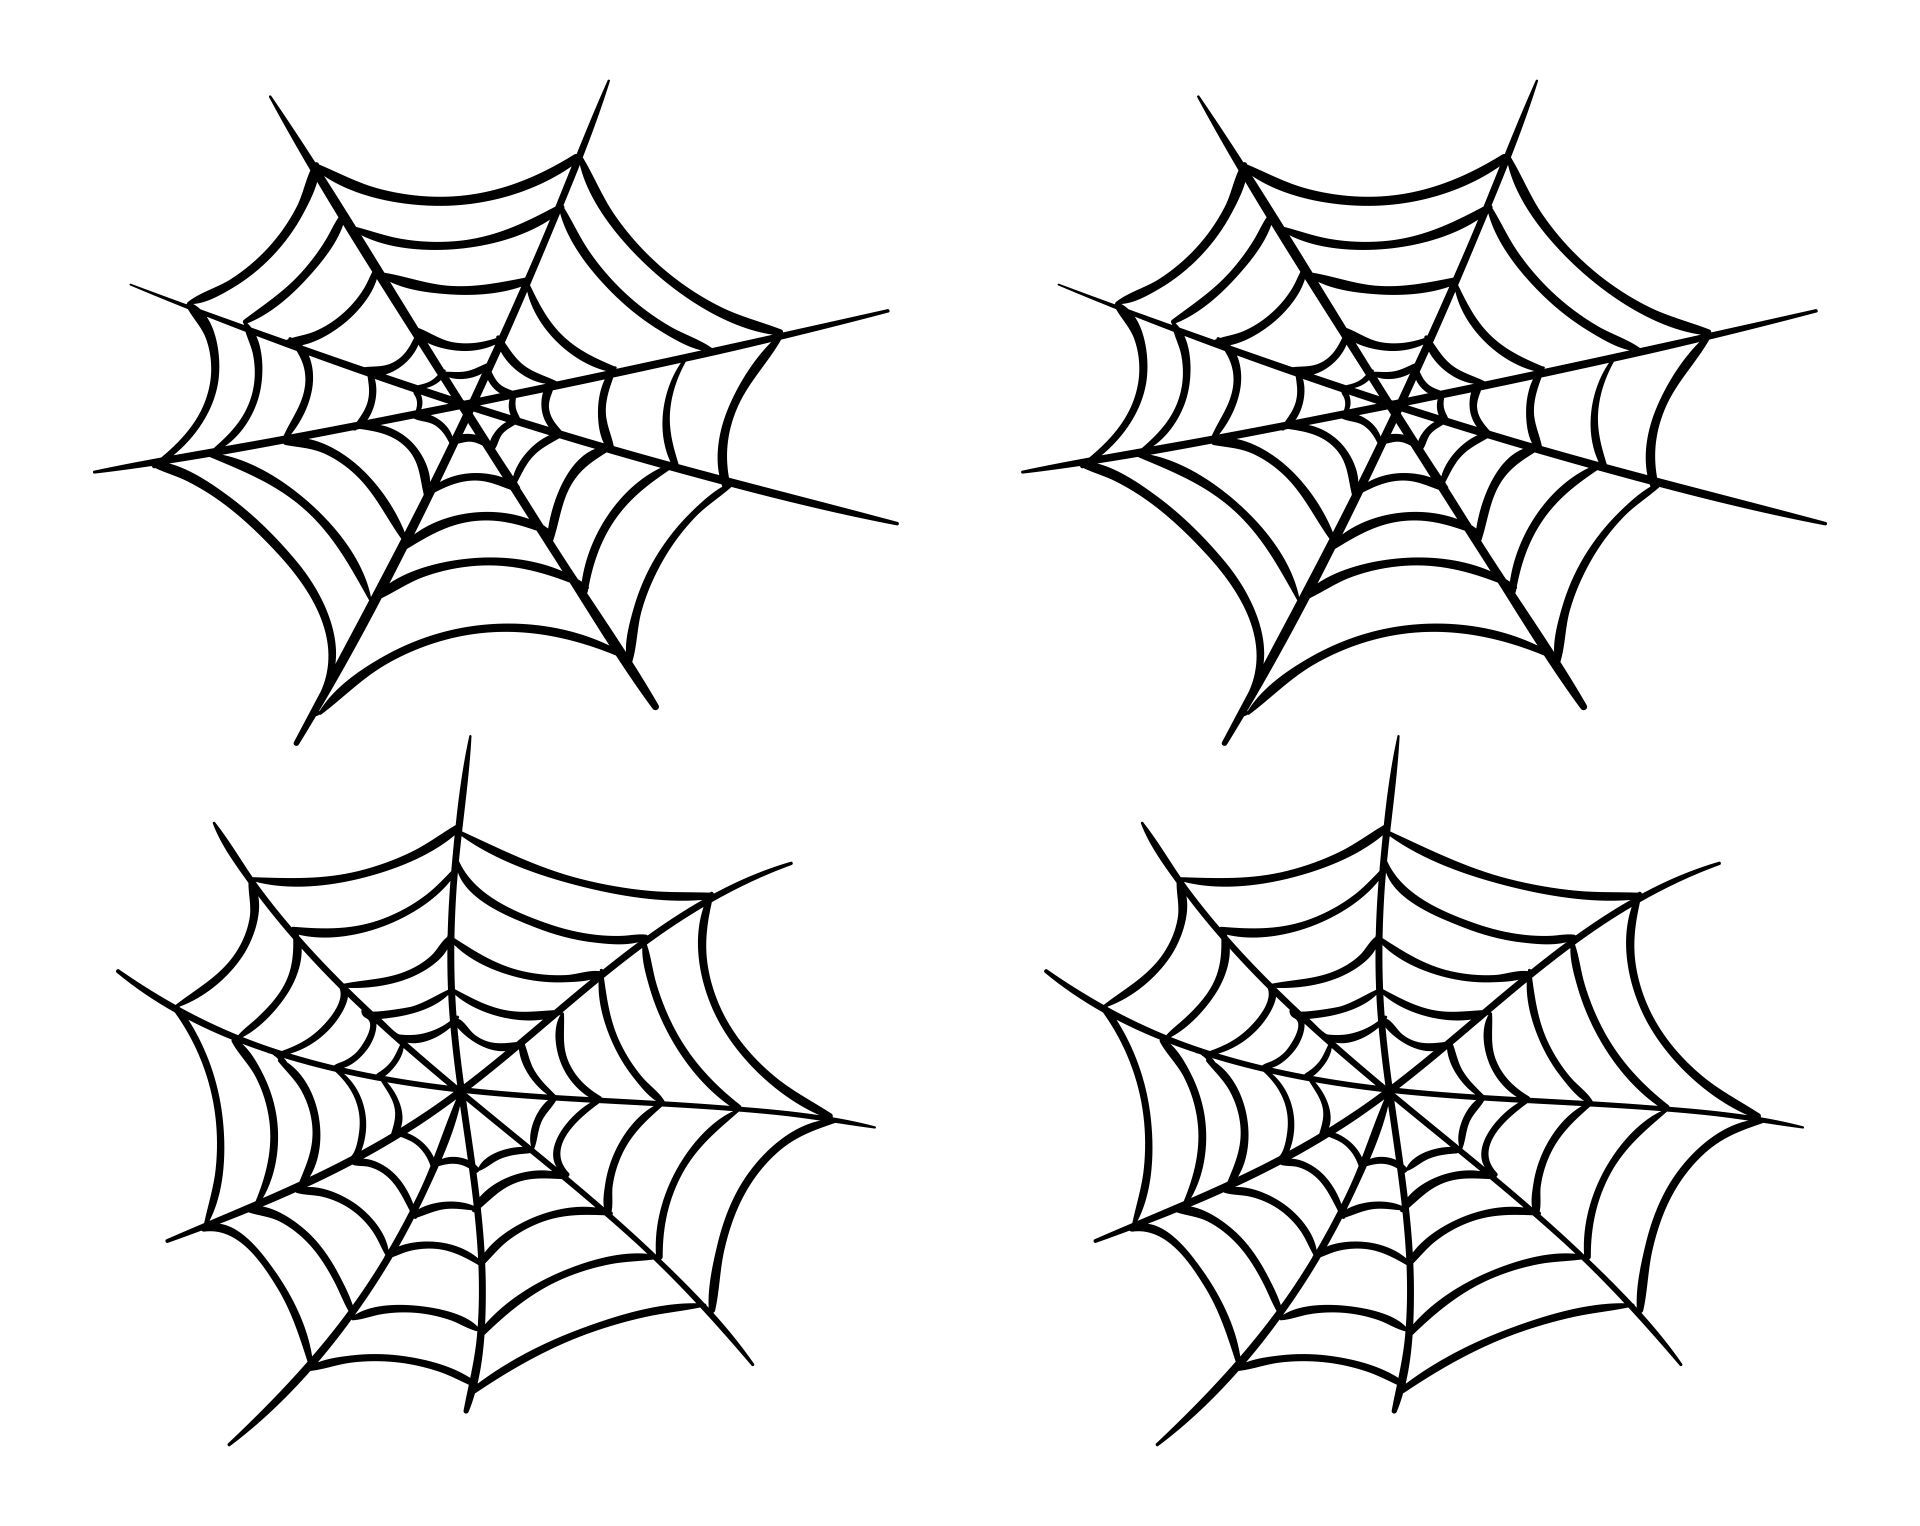 10 Best Printable Spider Template PDF For Free At Printablee Spider Template Spider Spider Crafts